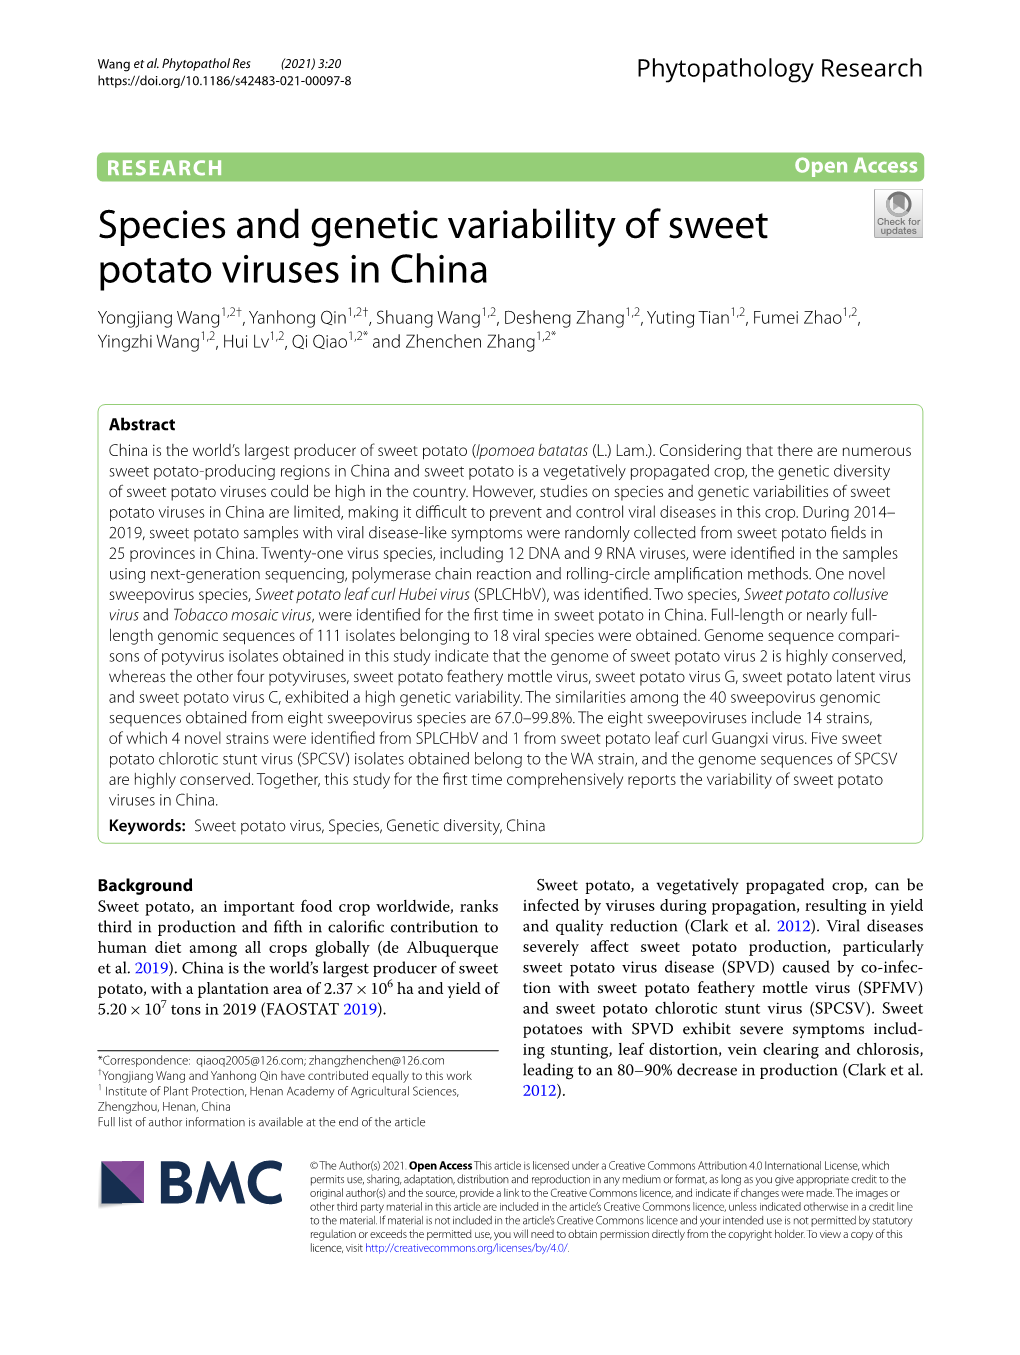 Species and Genetic Variability of Sweet Potato Viruses in China